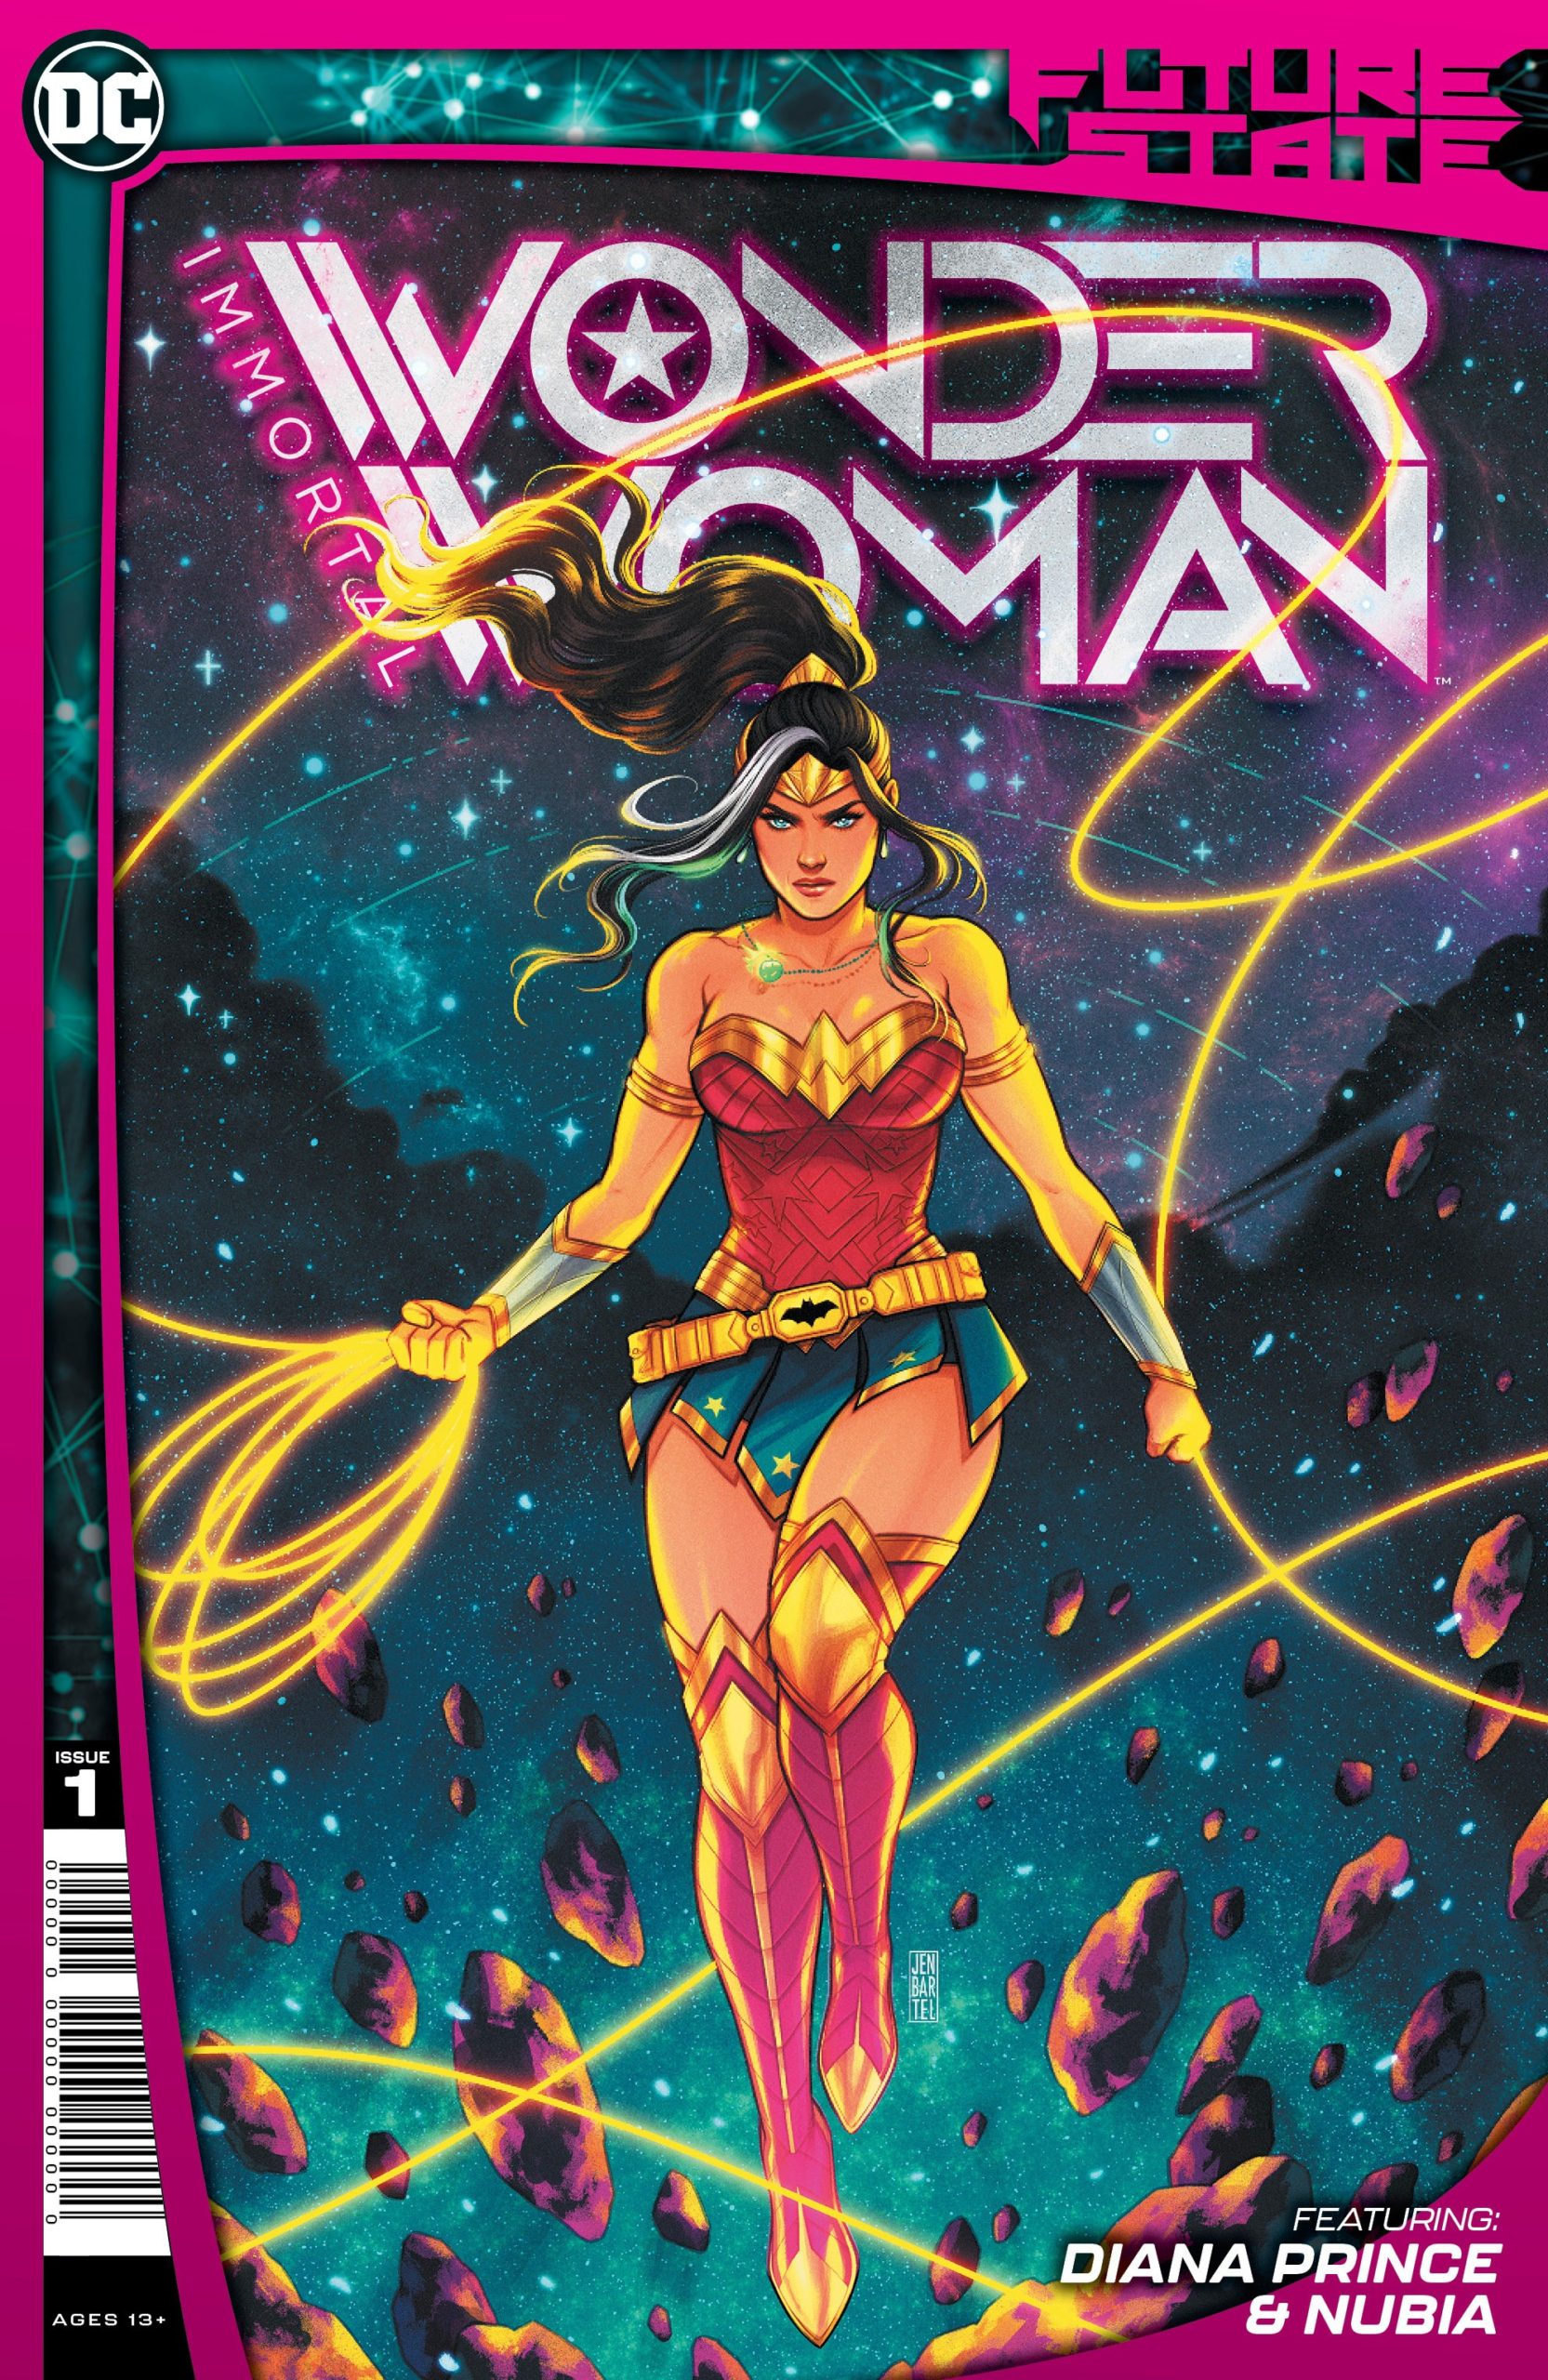 Diana Prince, Wonder Woman, wields her golden lasso as she floats in the cosmos. Cover art by Jen Bartel. 